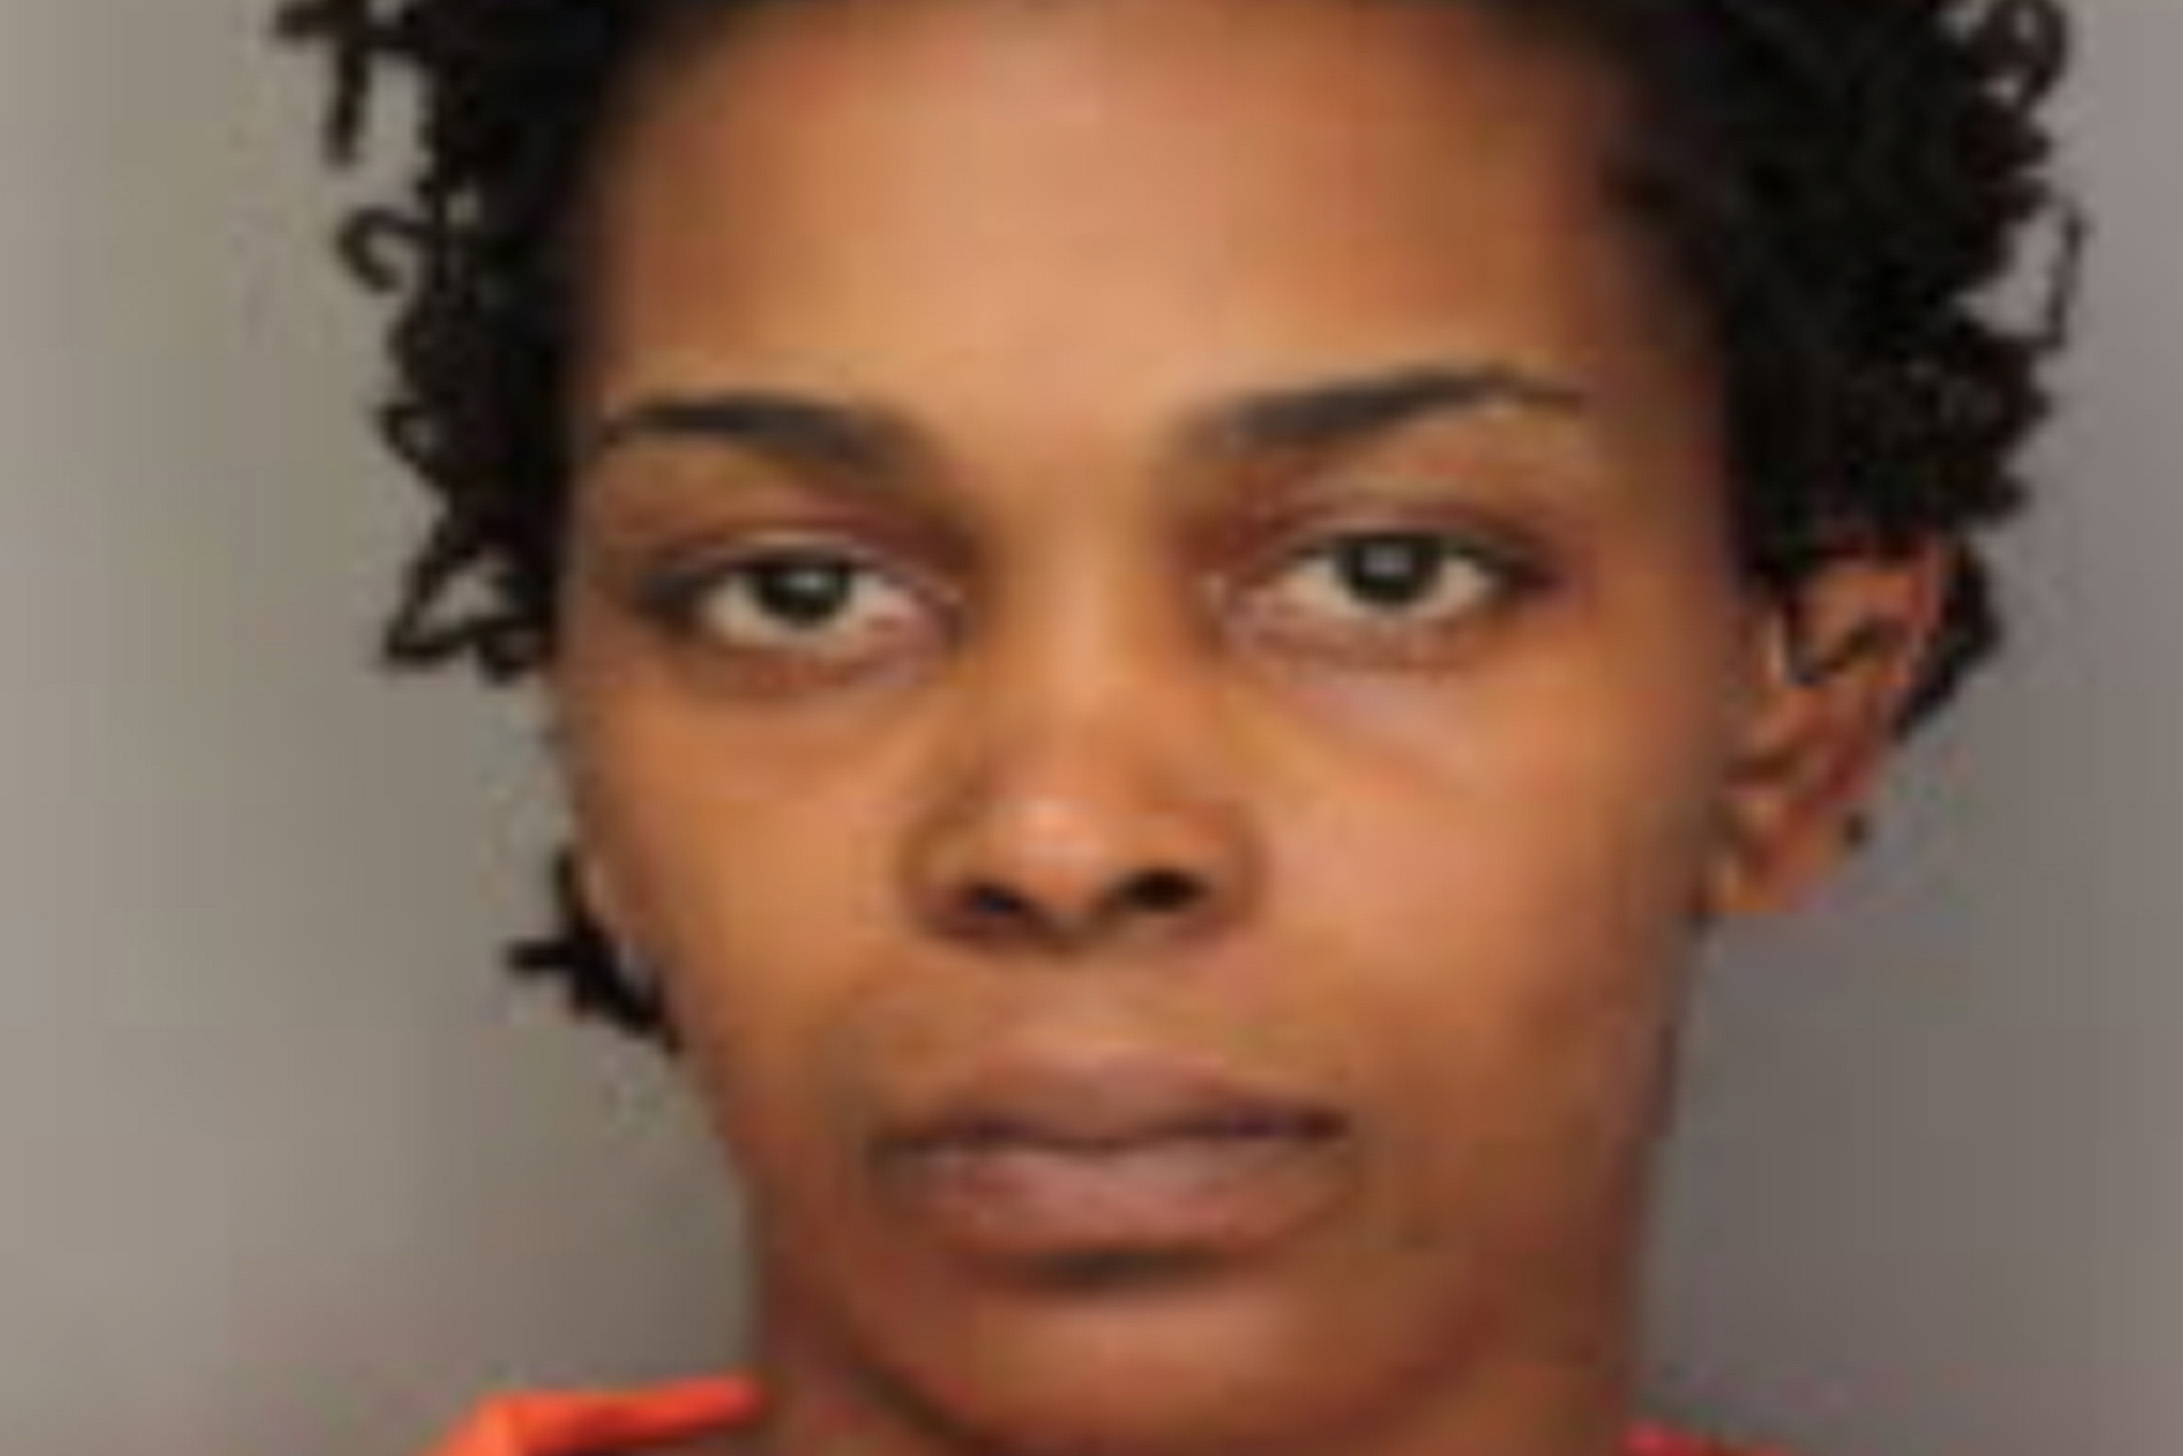 This 2016 arrest photo provided by the Shelby County Sheriff's Office shows Shanynthia Gardner of Memphis, Tenn. (Shelby County Sheriff's Office/AP)